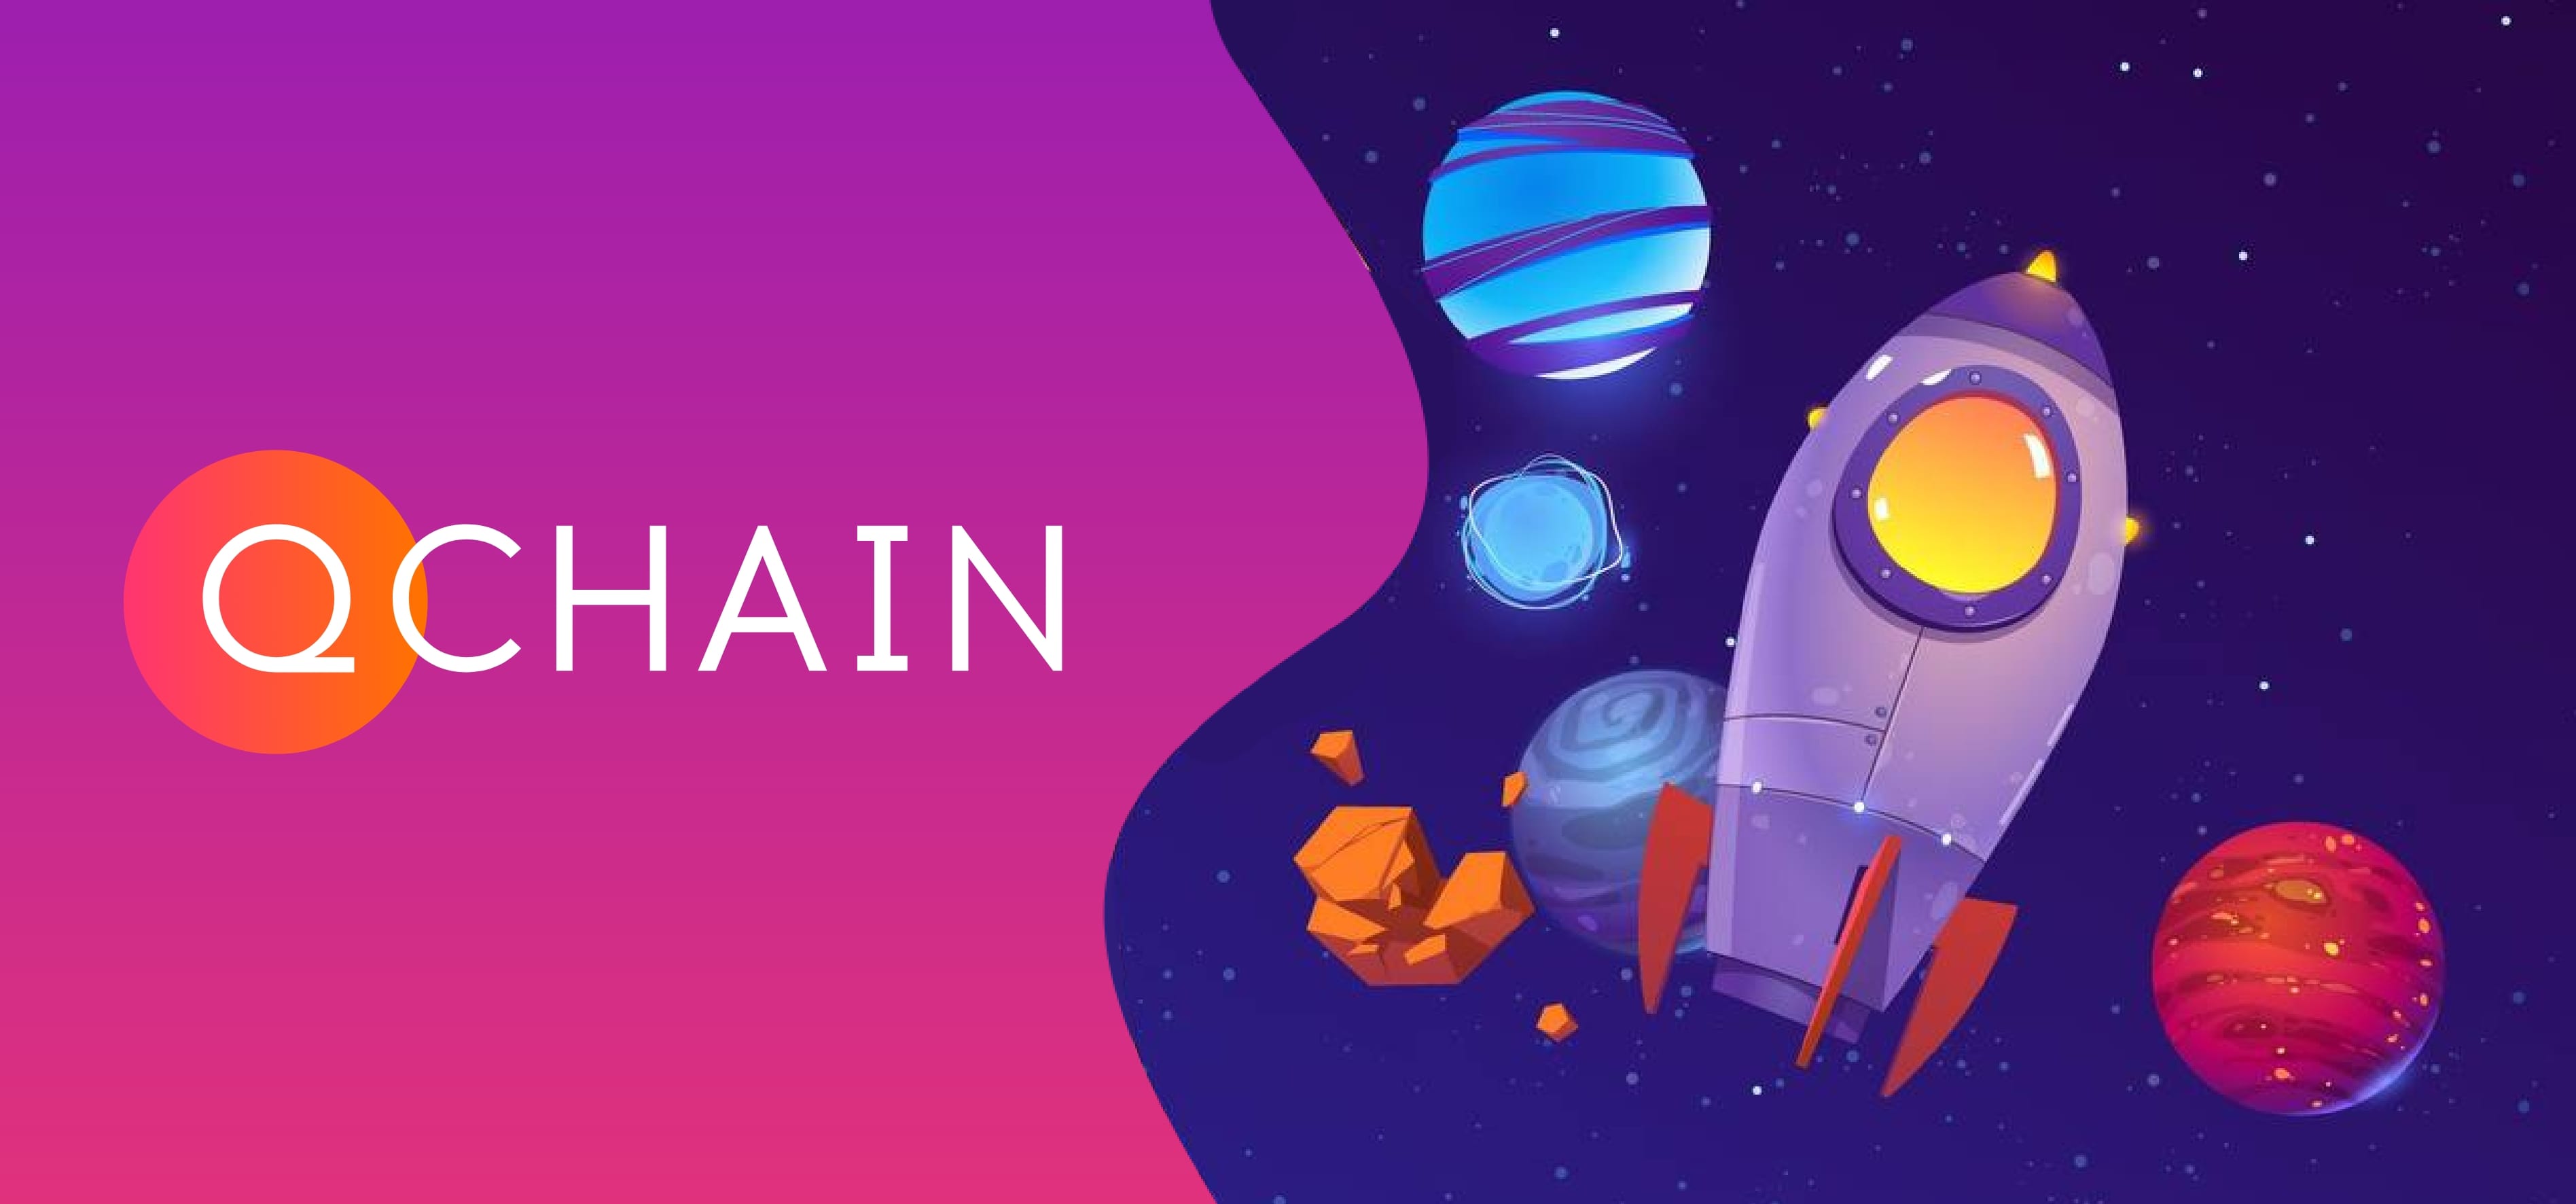 Launching a project on the blockchain Qchain